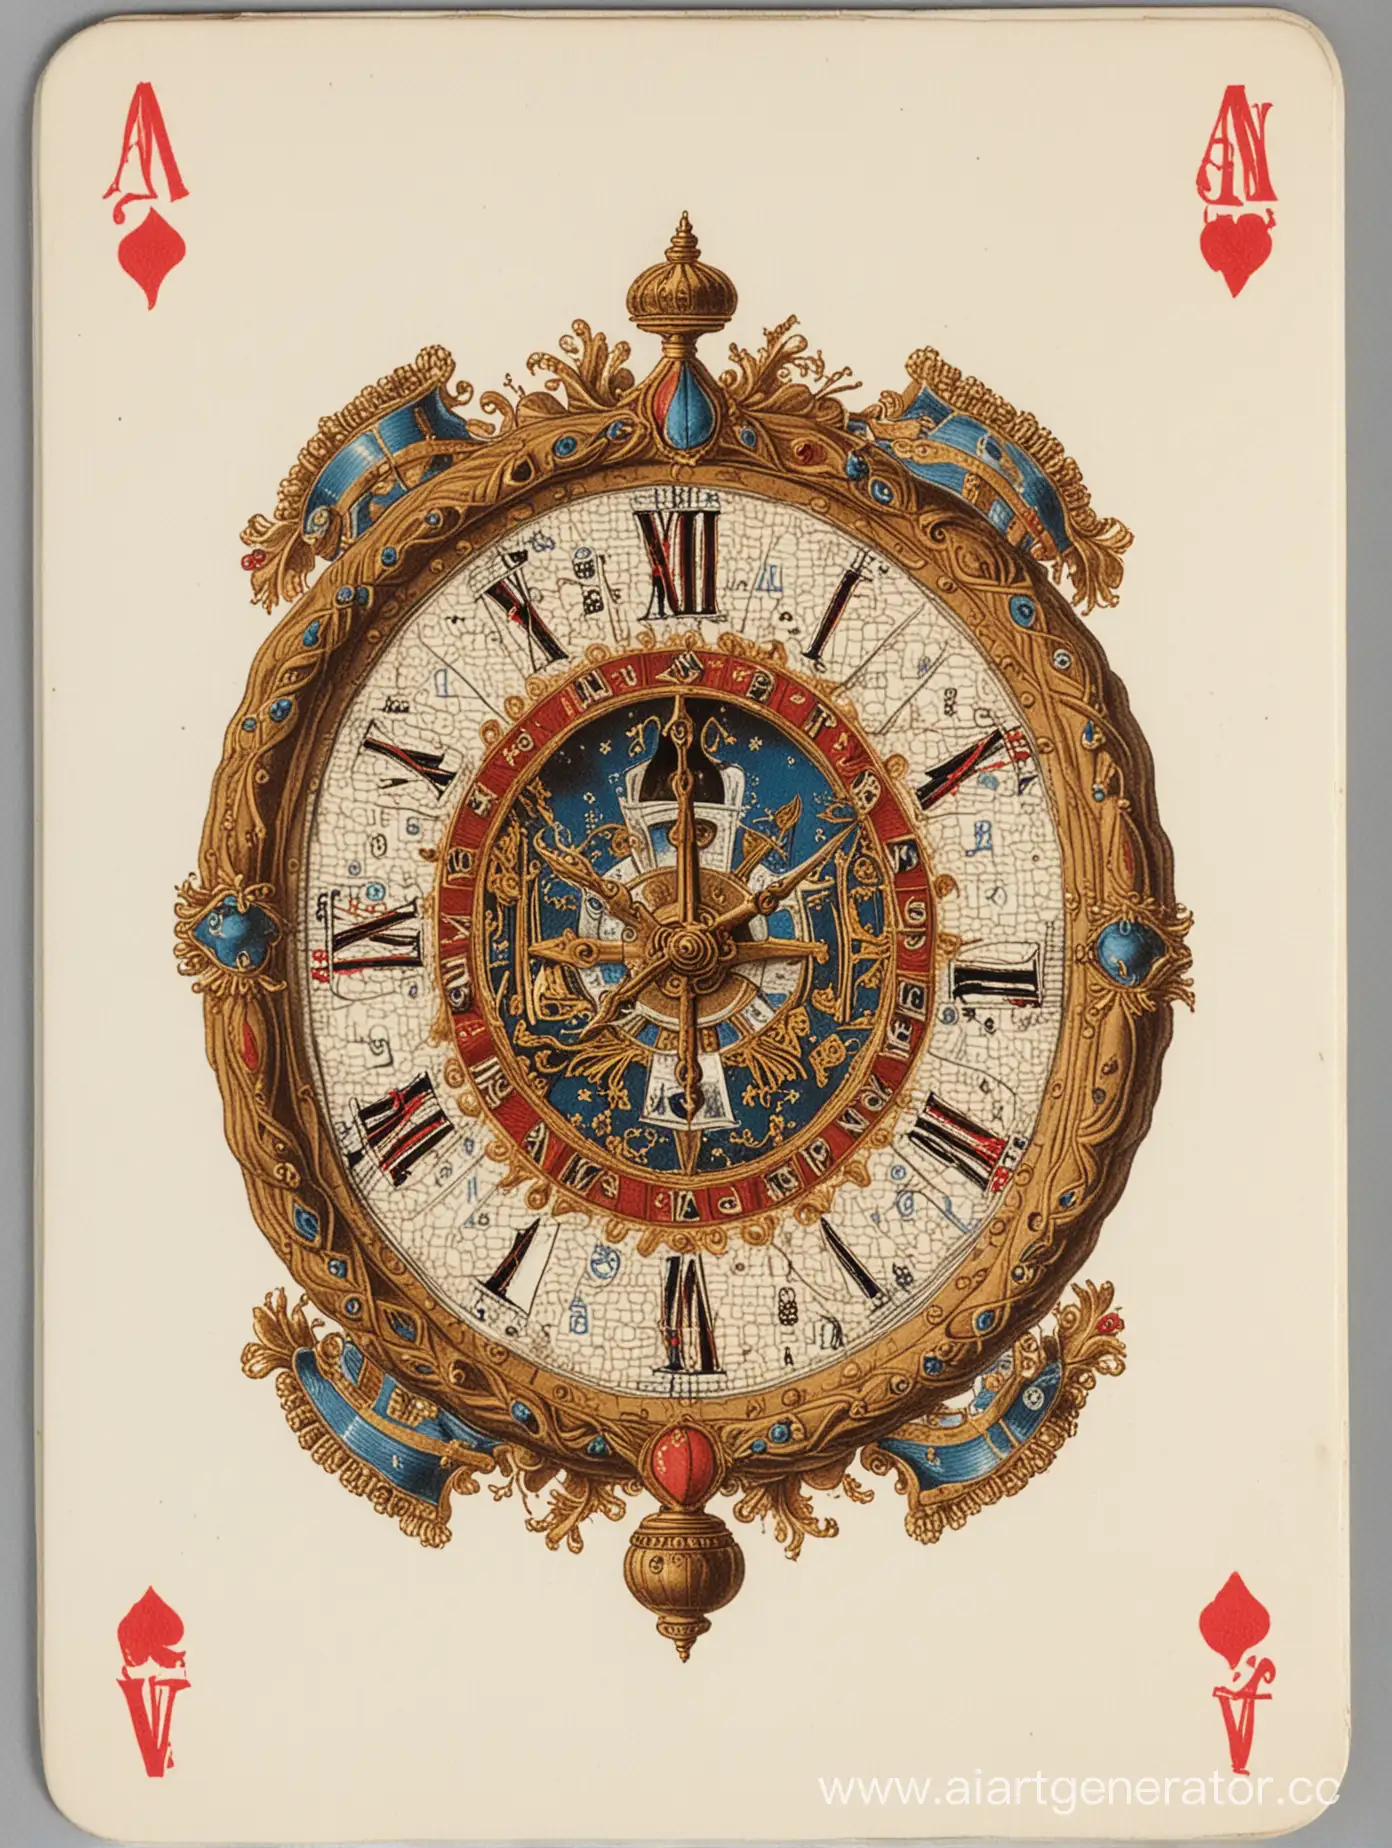 Napoleonthemed-Shirt-Playing-Card-with-Clock-Time-Depictions